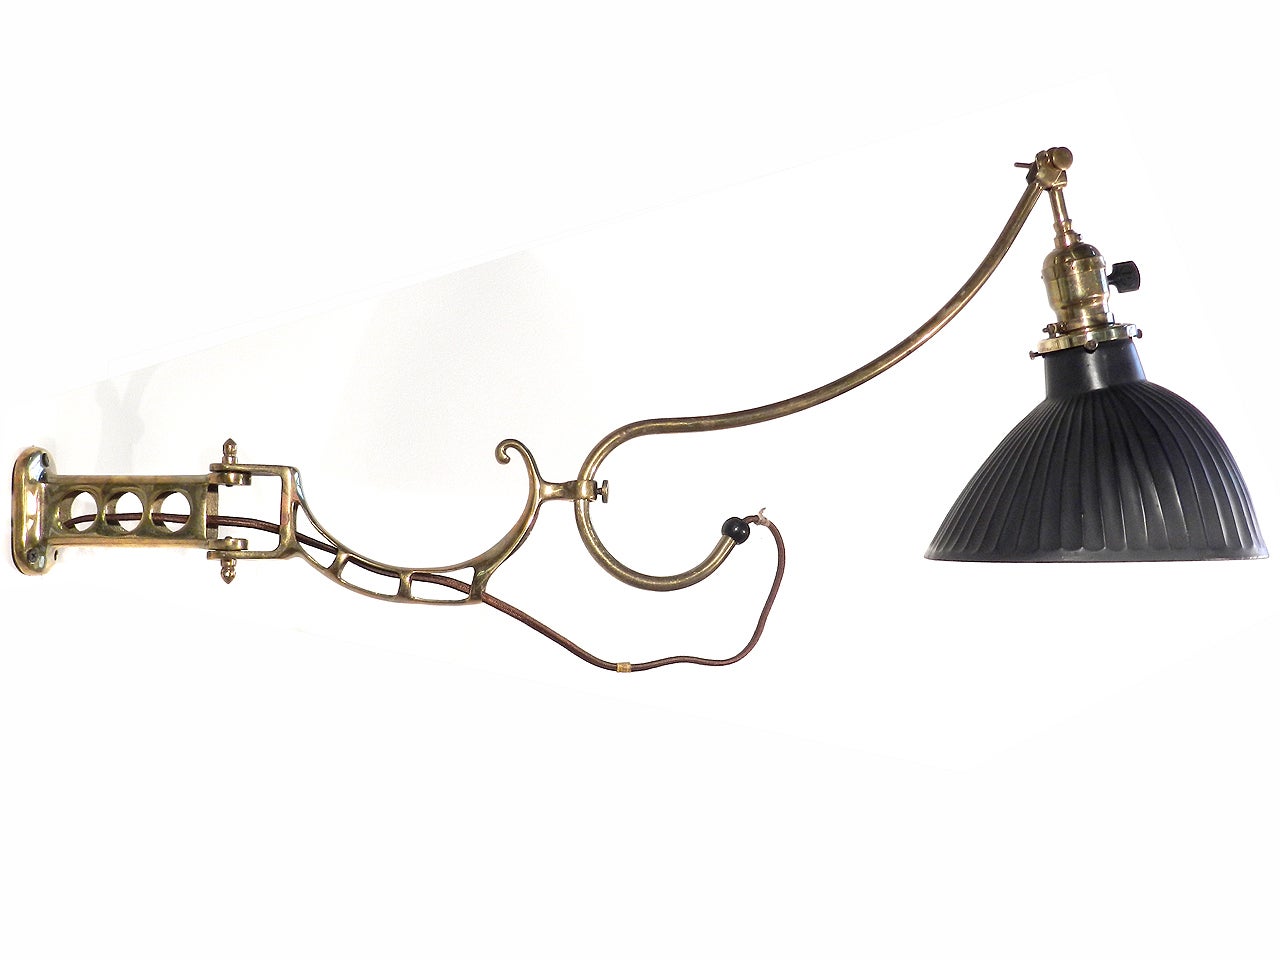 Pair of Small Ornate Faries Dental Lamp - Polished Finish